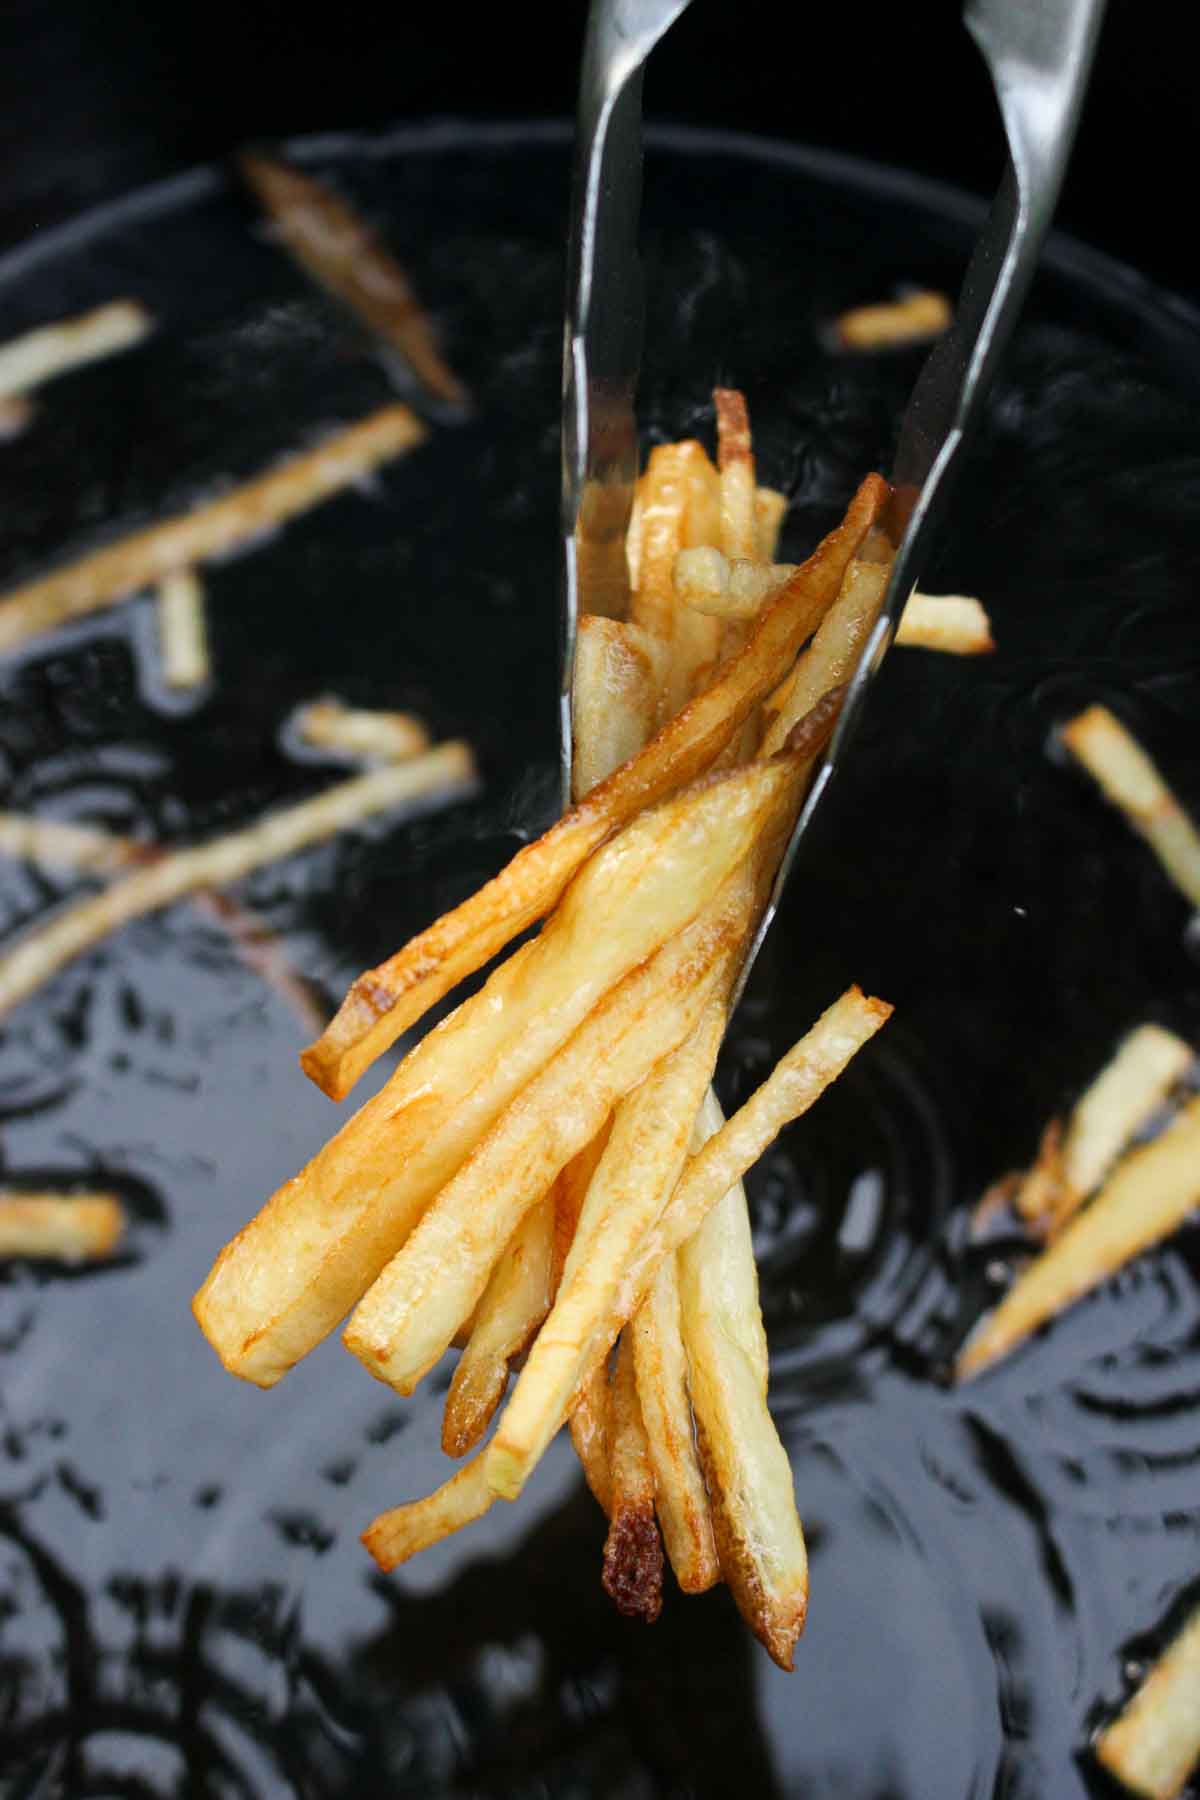 Pulling the fries out of the frying oil for our steak frites recipe!